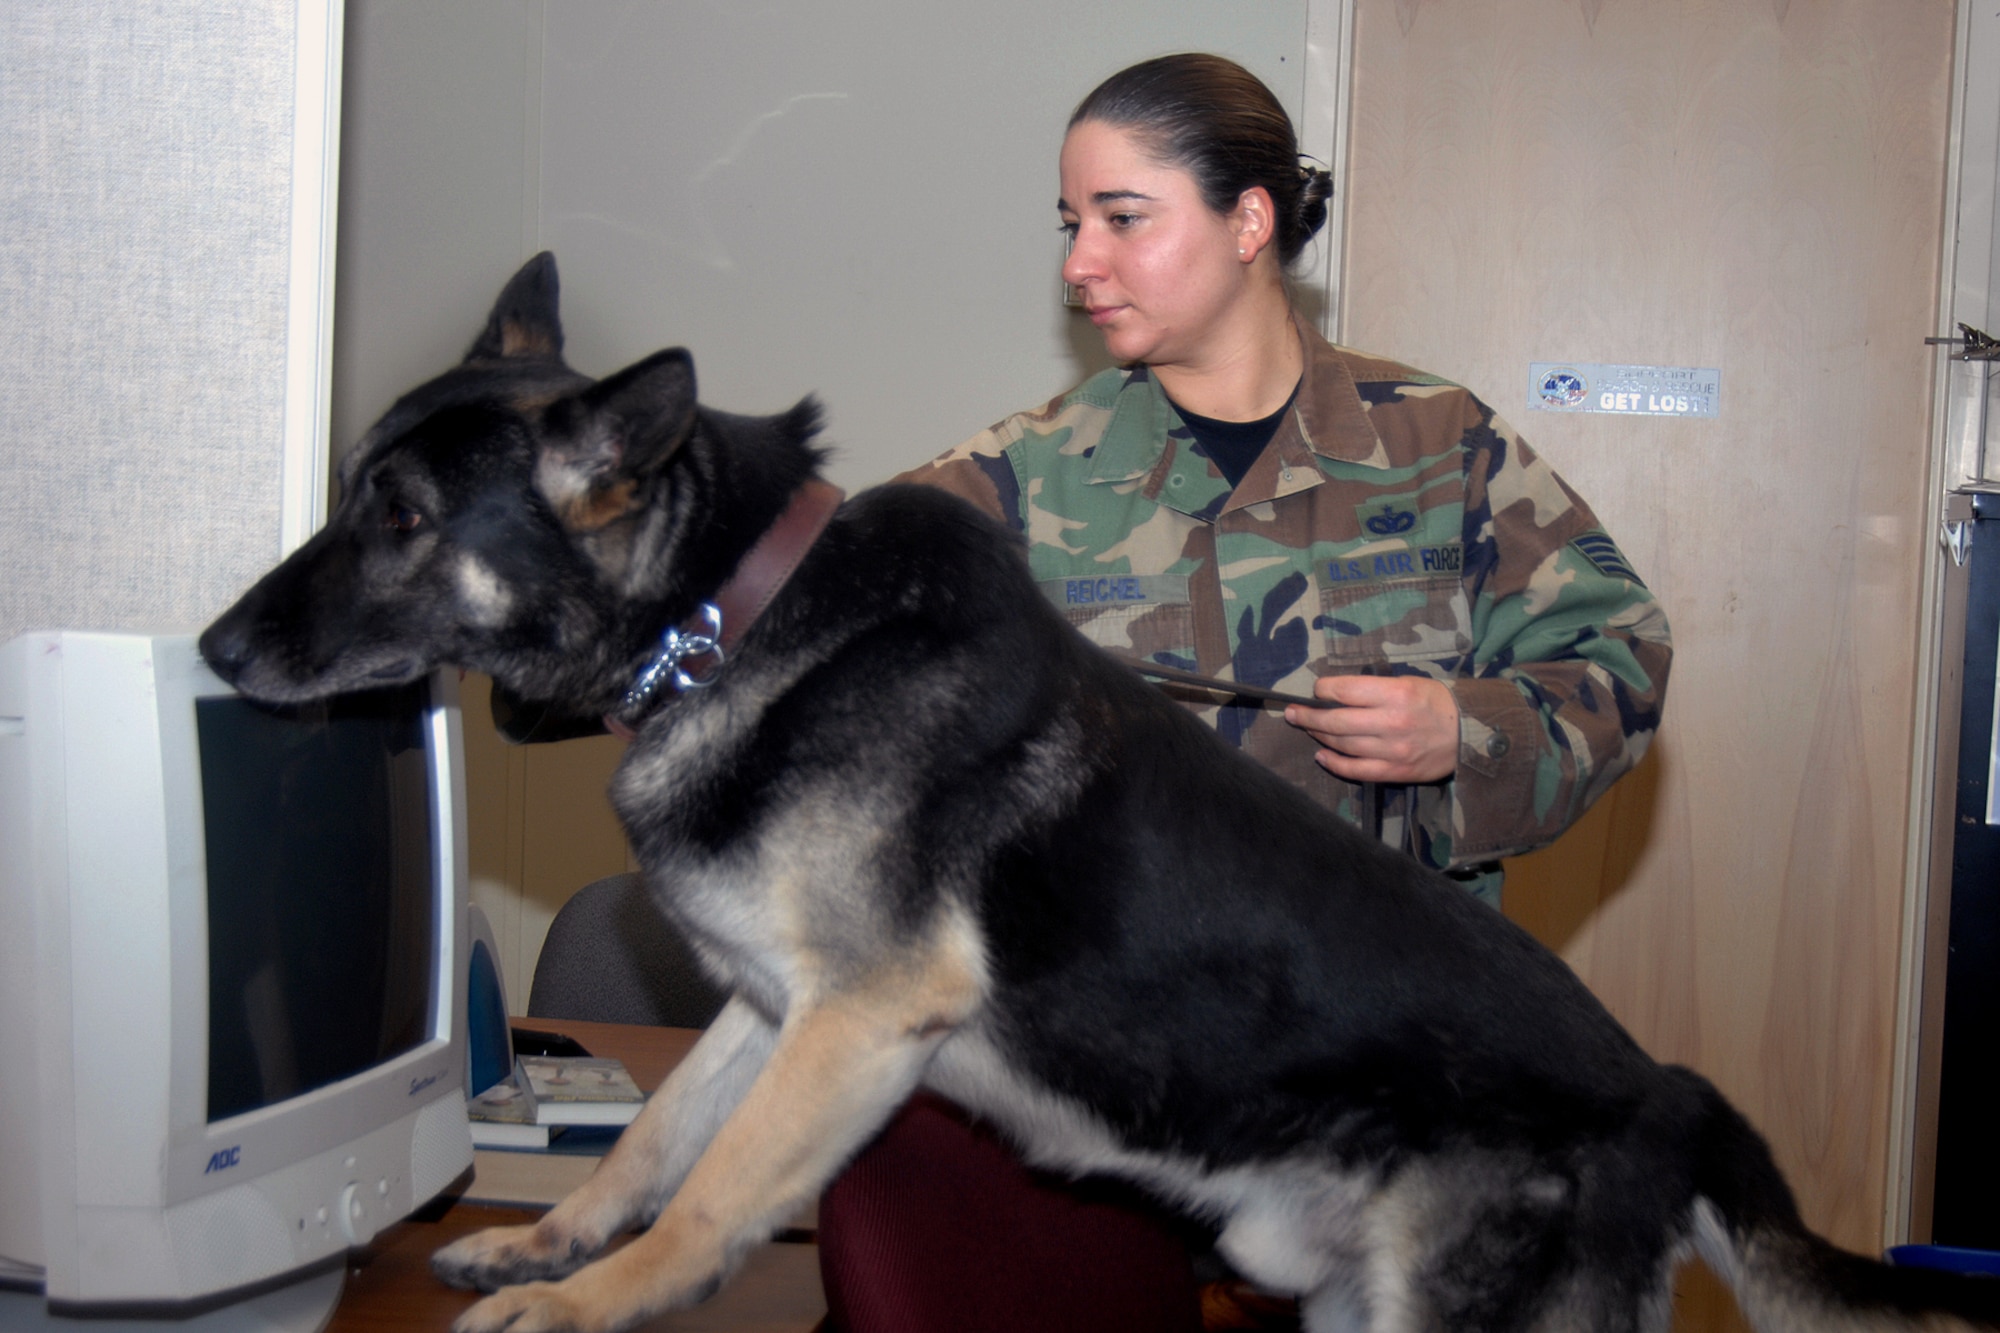 Staff Sergeant Jeanette Reichel, 66th Security Forces Squadron, and her Military Working Dog, Petya, a 6-year old German Sheppard, tattoo F-028, perform a search during her K-9 handler certification test. Sergeant Reichel entered the Hanscom history books on March 21 as the first female dog handler here in the past two decades after successfully completing her certification. (U.S. Air Force Photo by Linda LaBonte Britt)